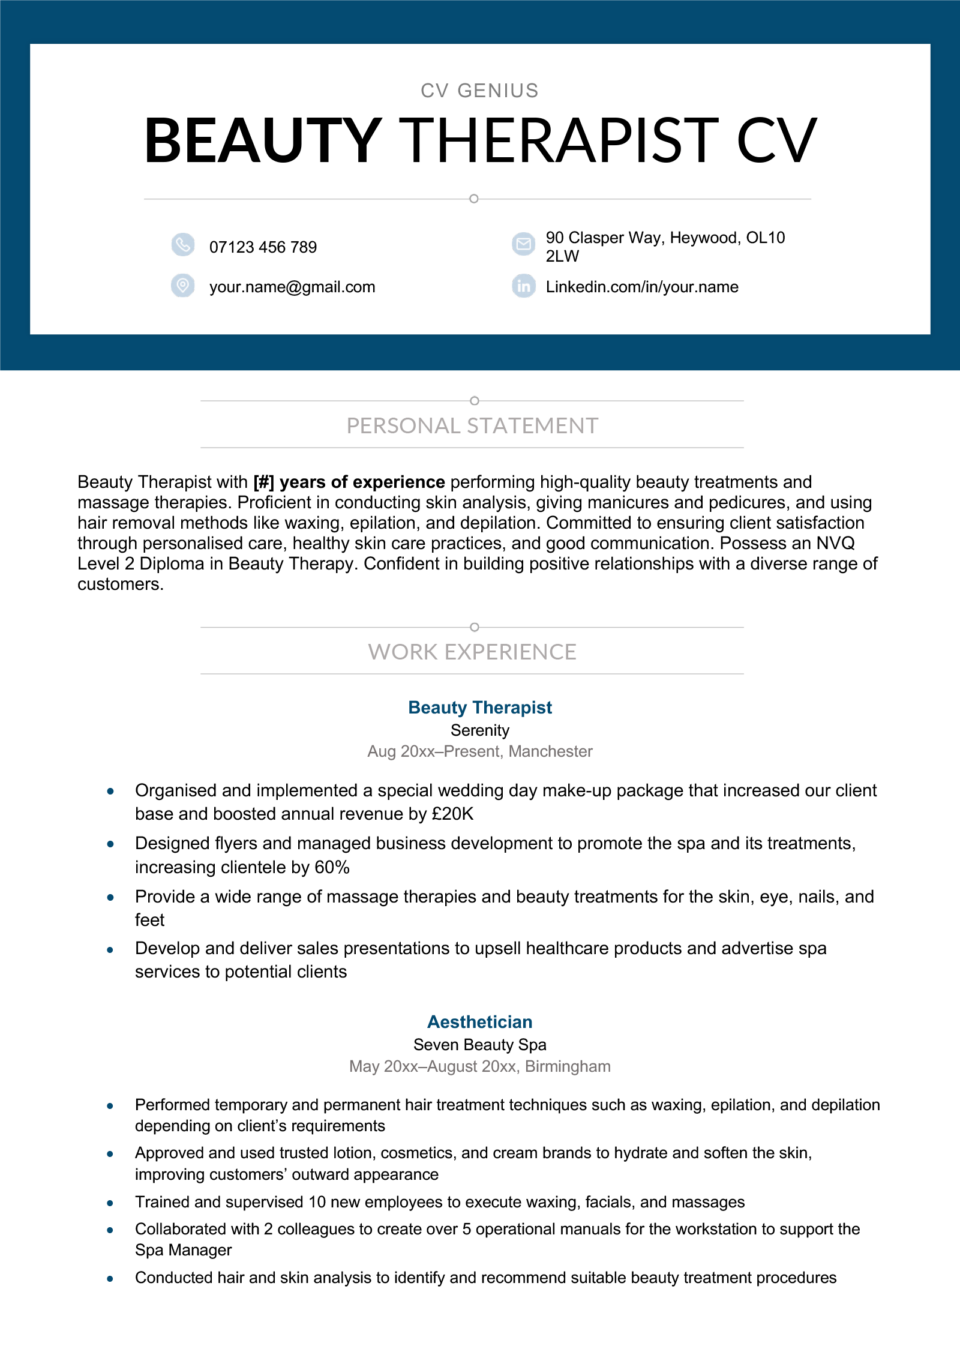 The first page of a beauty therapist CV sample with a professionally designed header and sections for the applicant's personal statement and work experience.